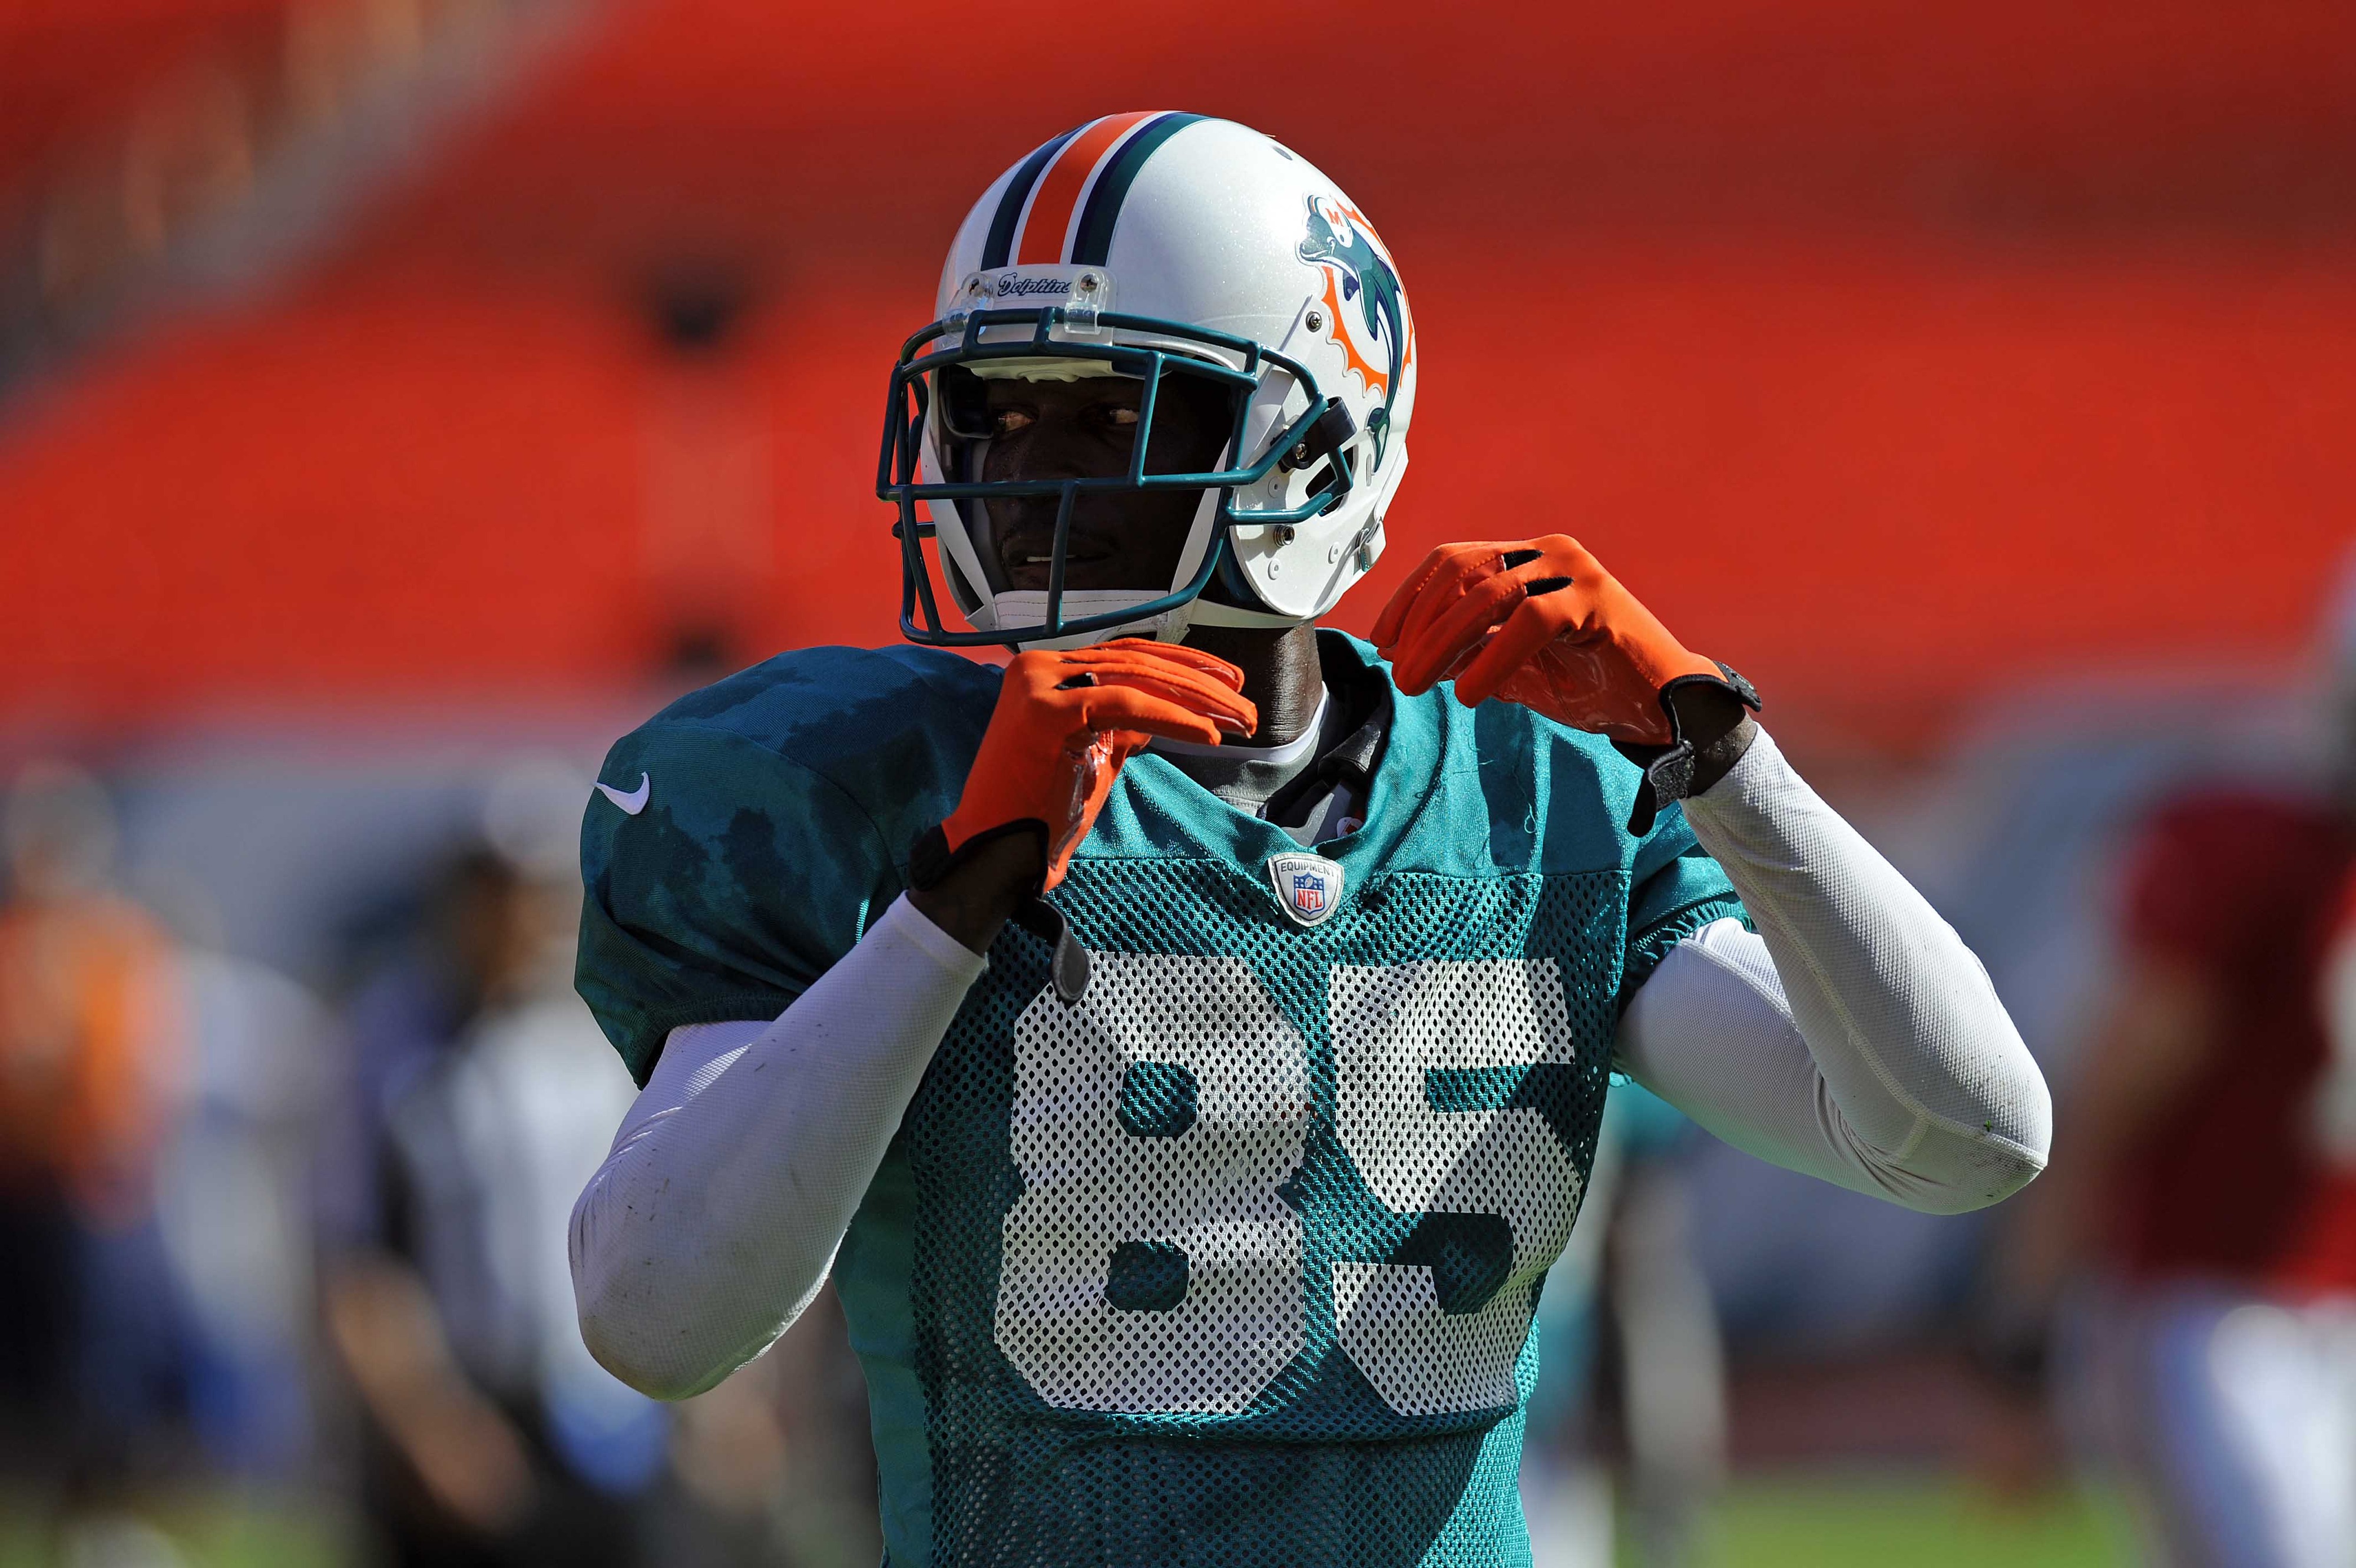 The knocks keep coming for former Miami Dolphins wide receiver Chad Johnson.